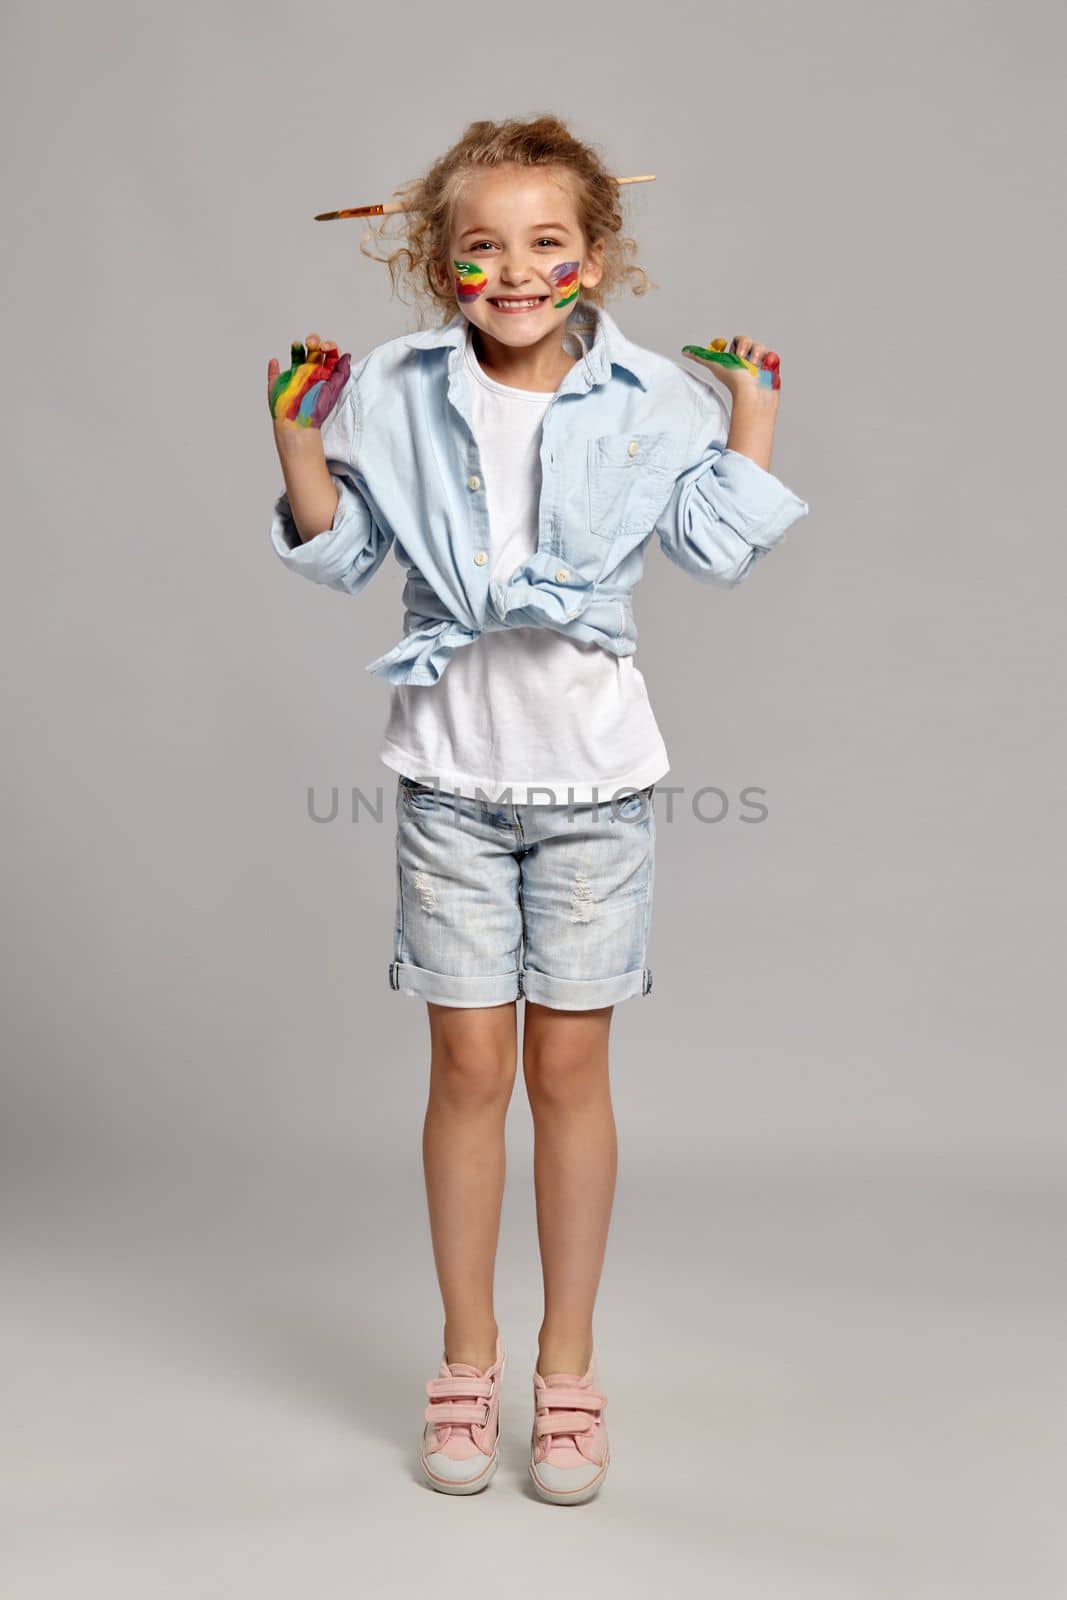 Cheerful little lady having a brush in her chic curly blond hair, wearing in a blue shirt and white t-shirt. She stood on tiptoe and smiling, on a gray background.